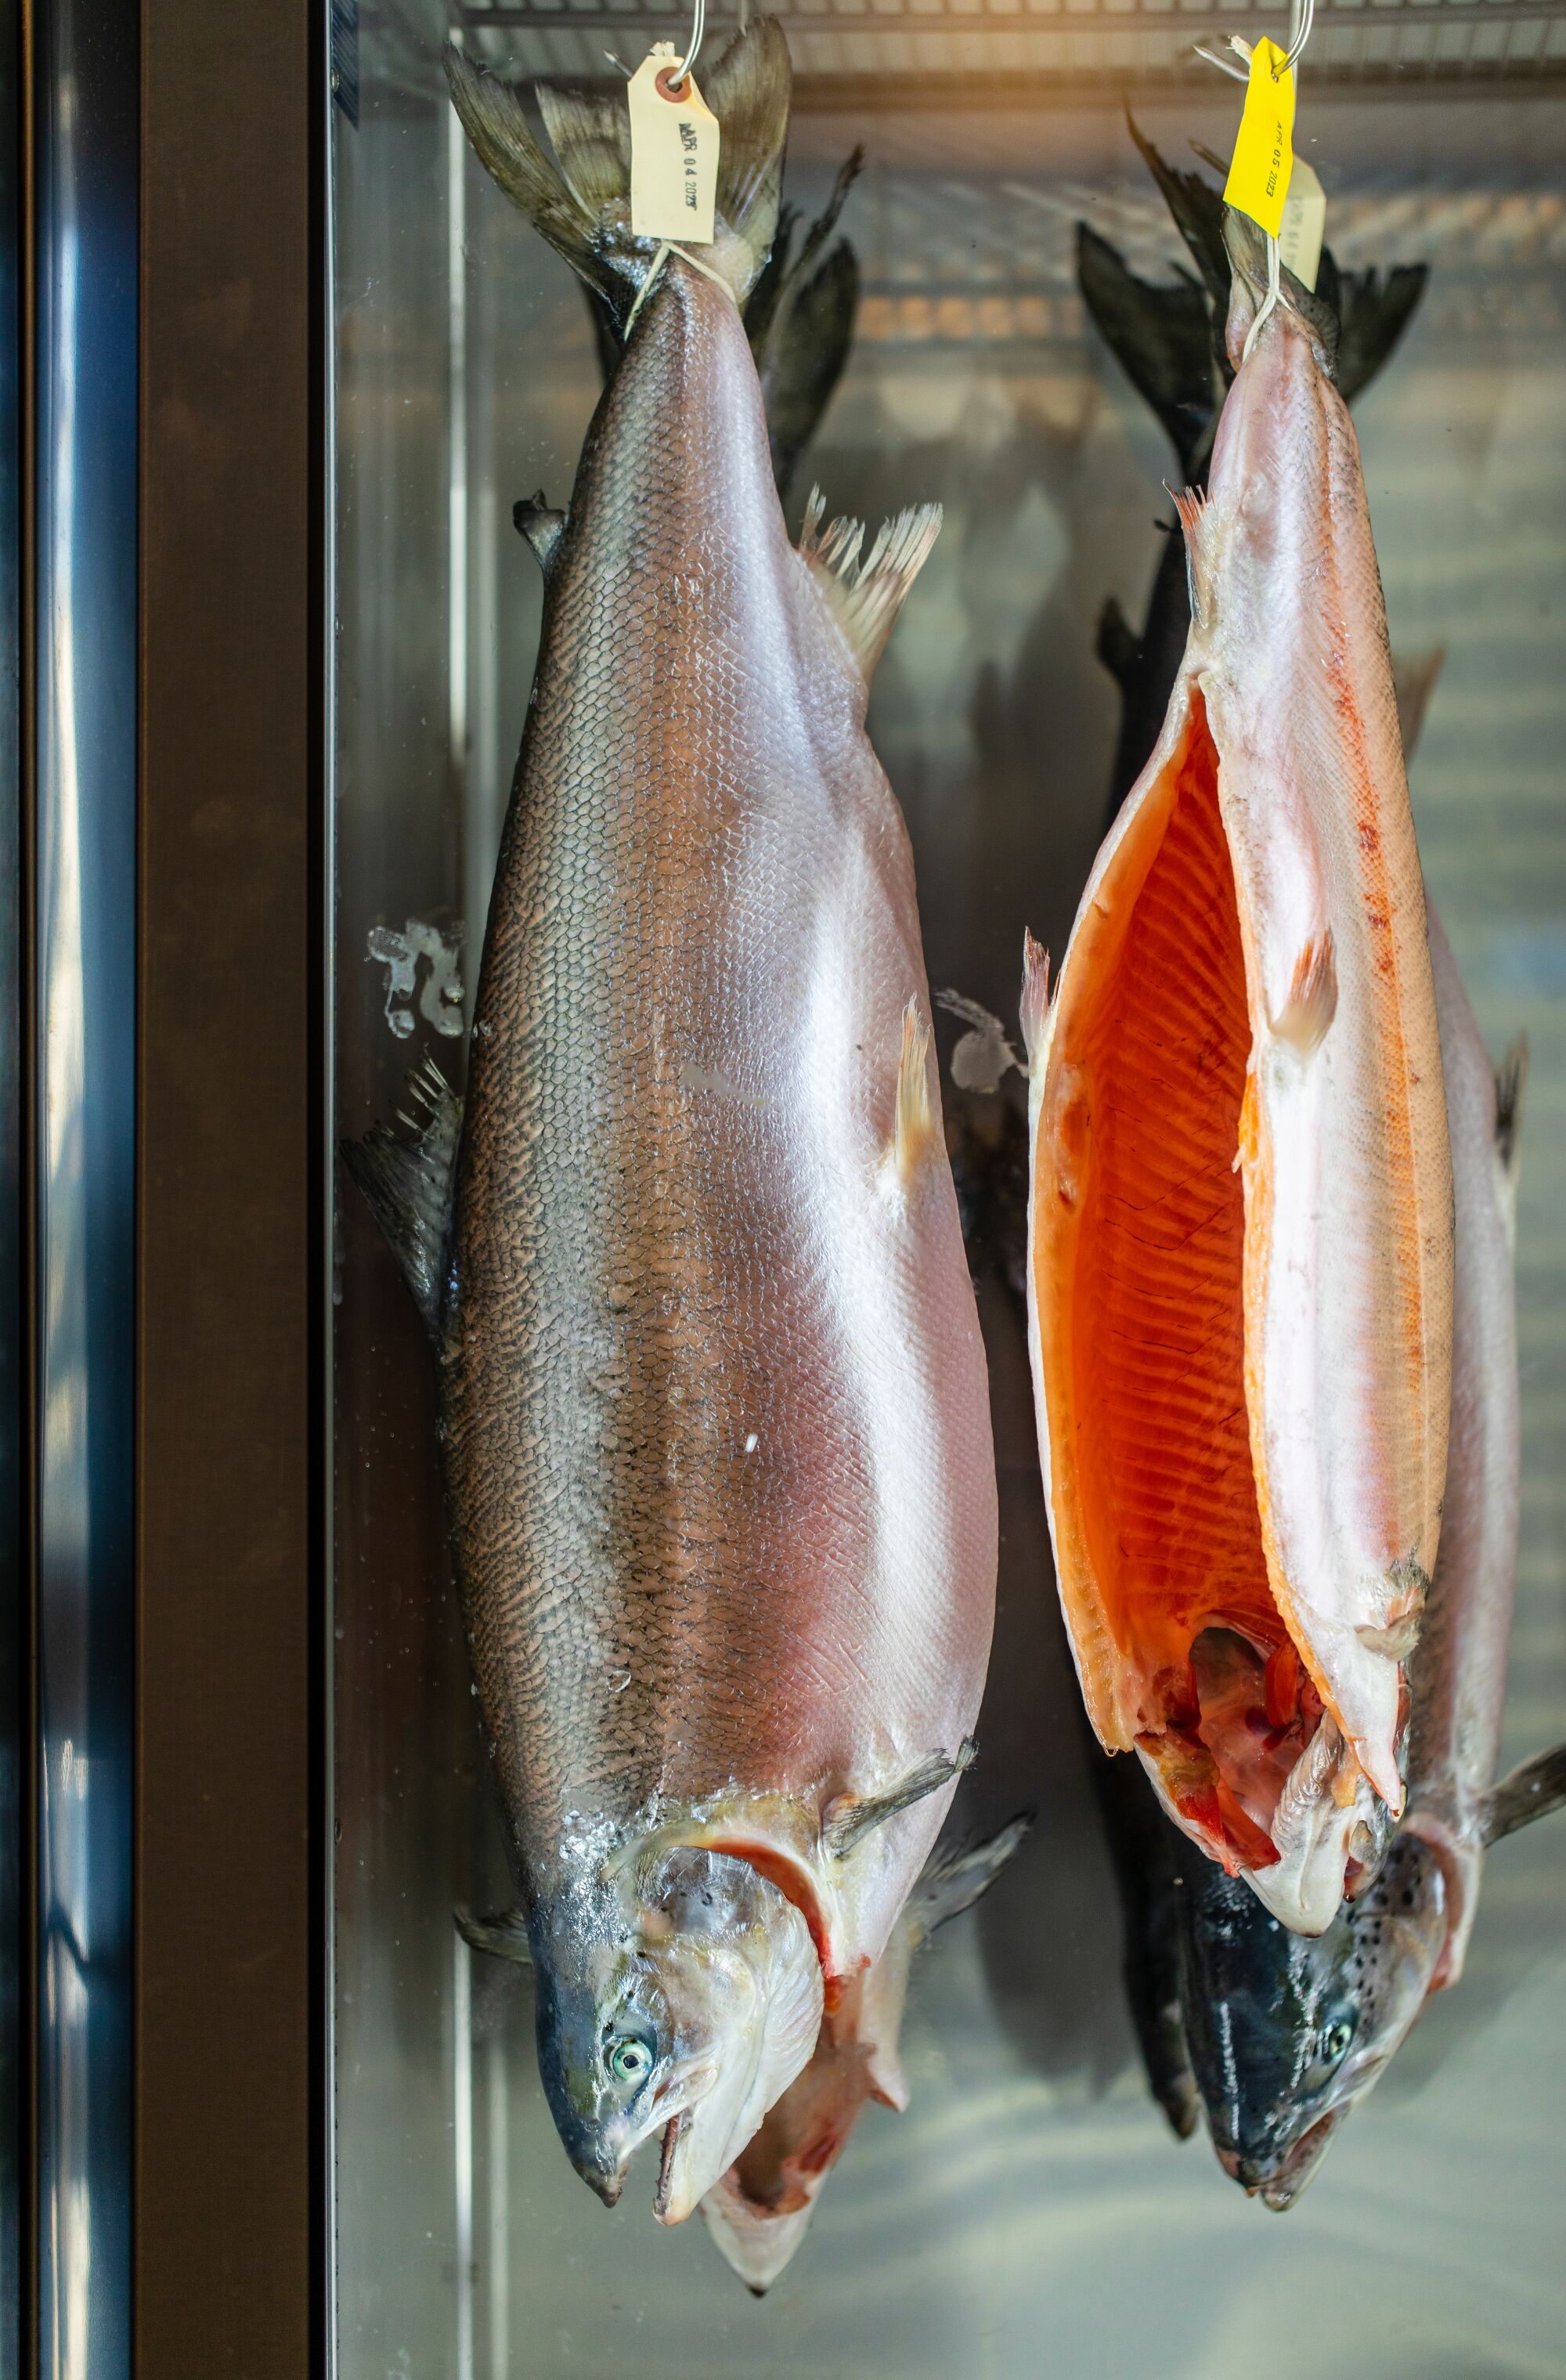 Scottish salmon, gutted and pink inside, hang upside down in a dry-aging fridge.